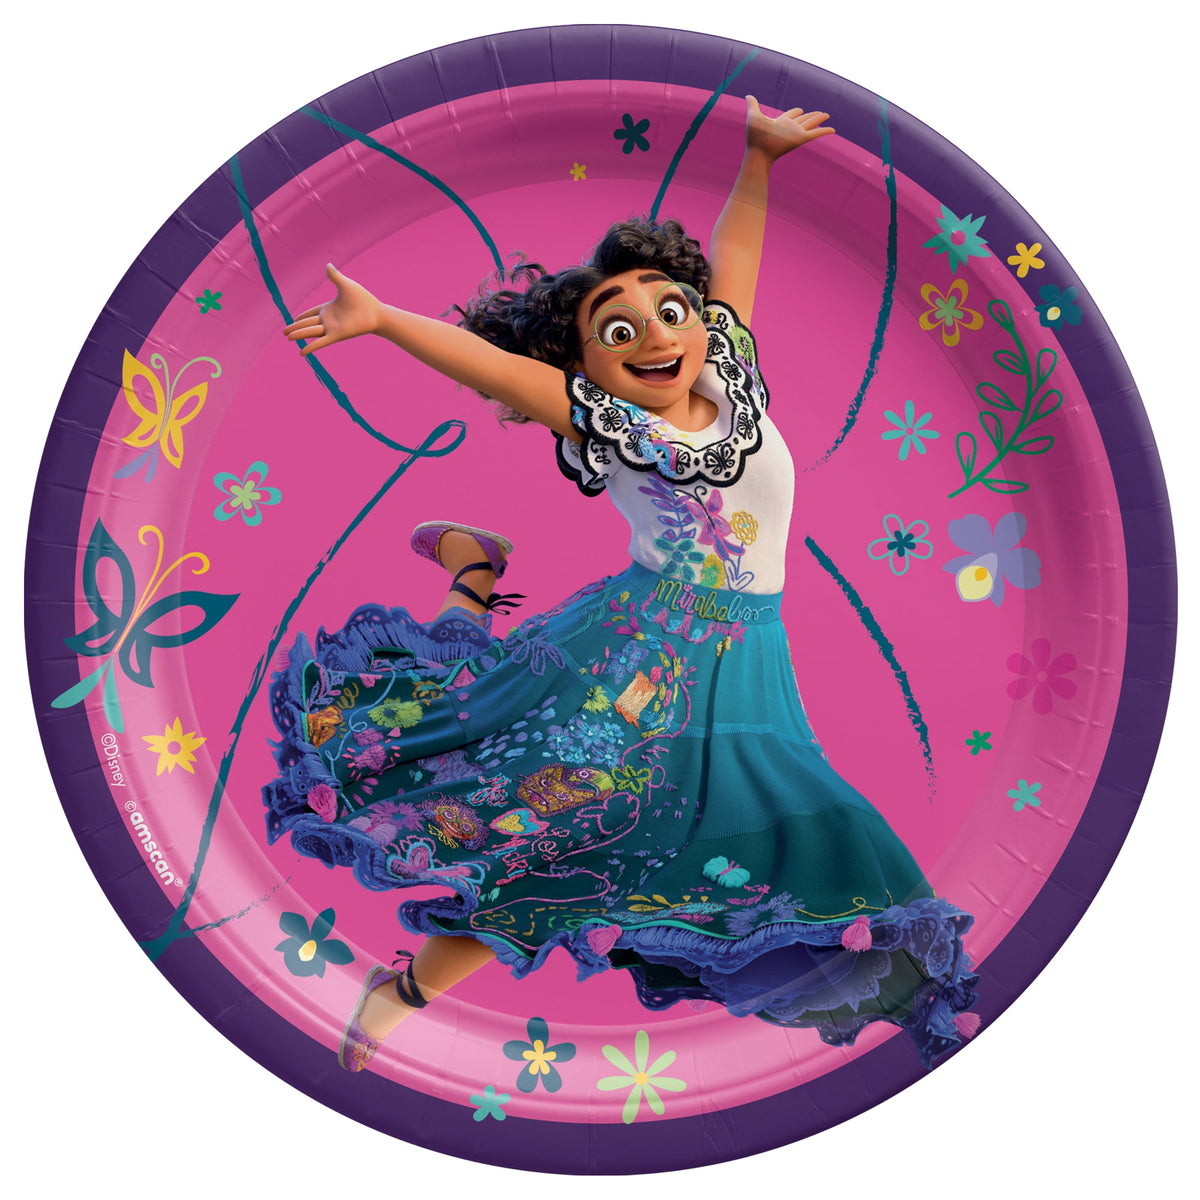 Encanto 7" Round Plates Package of 8